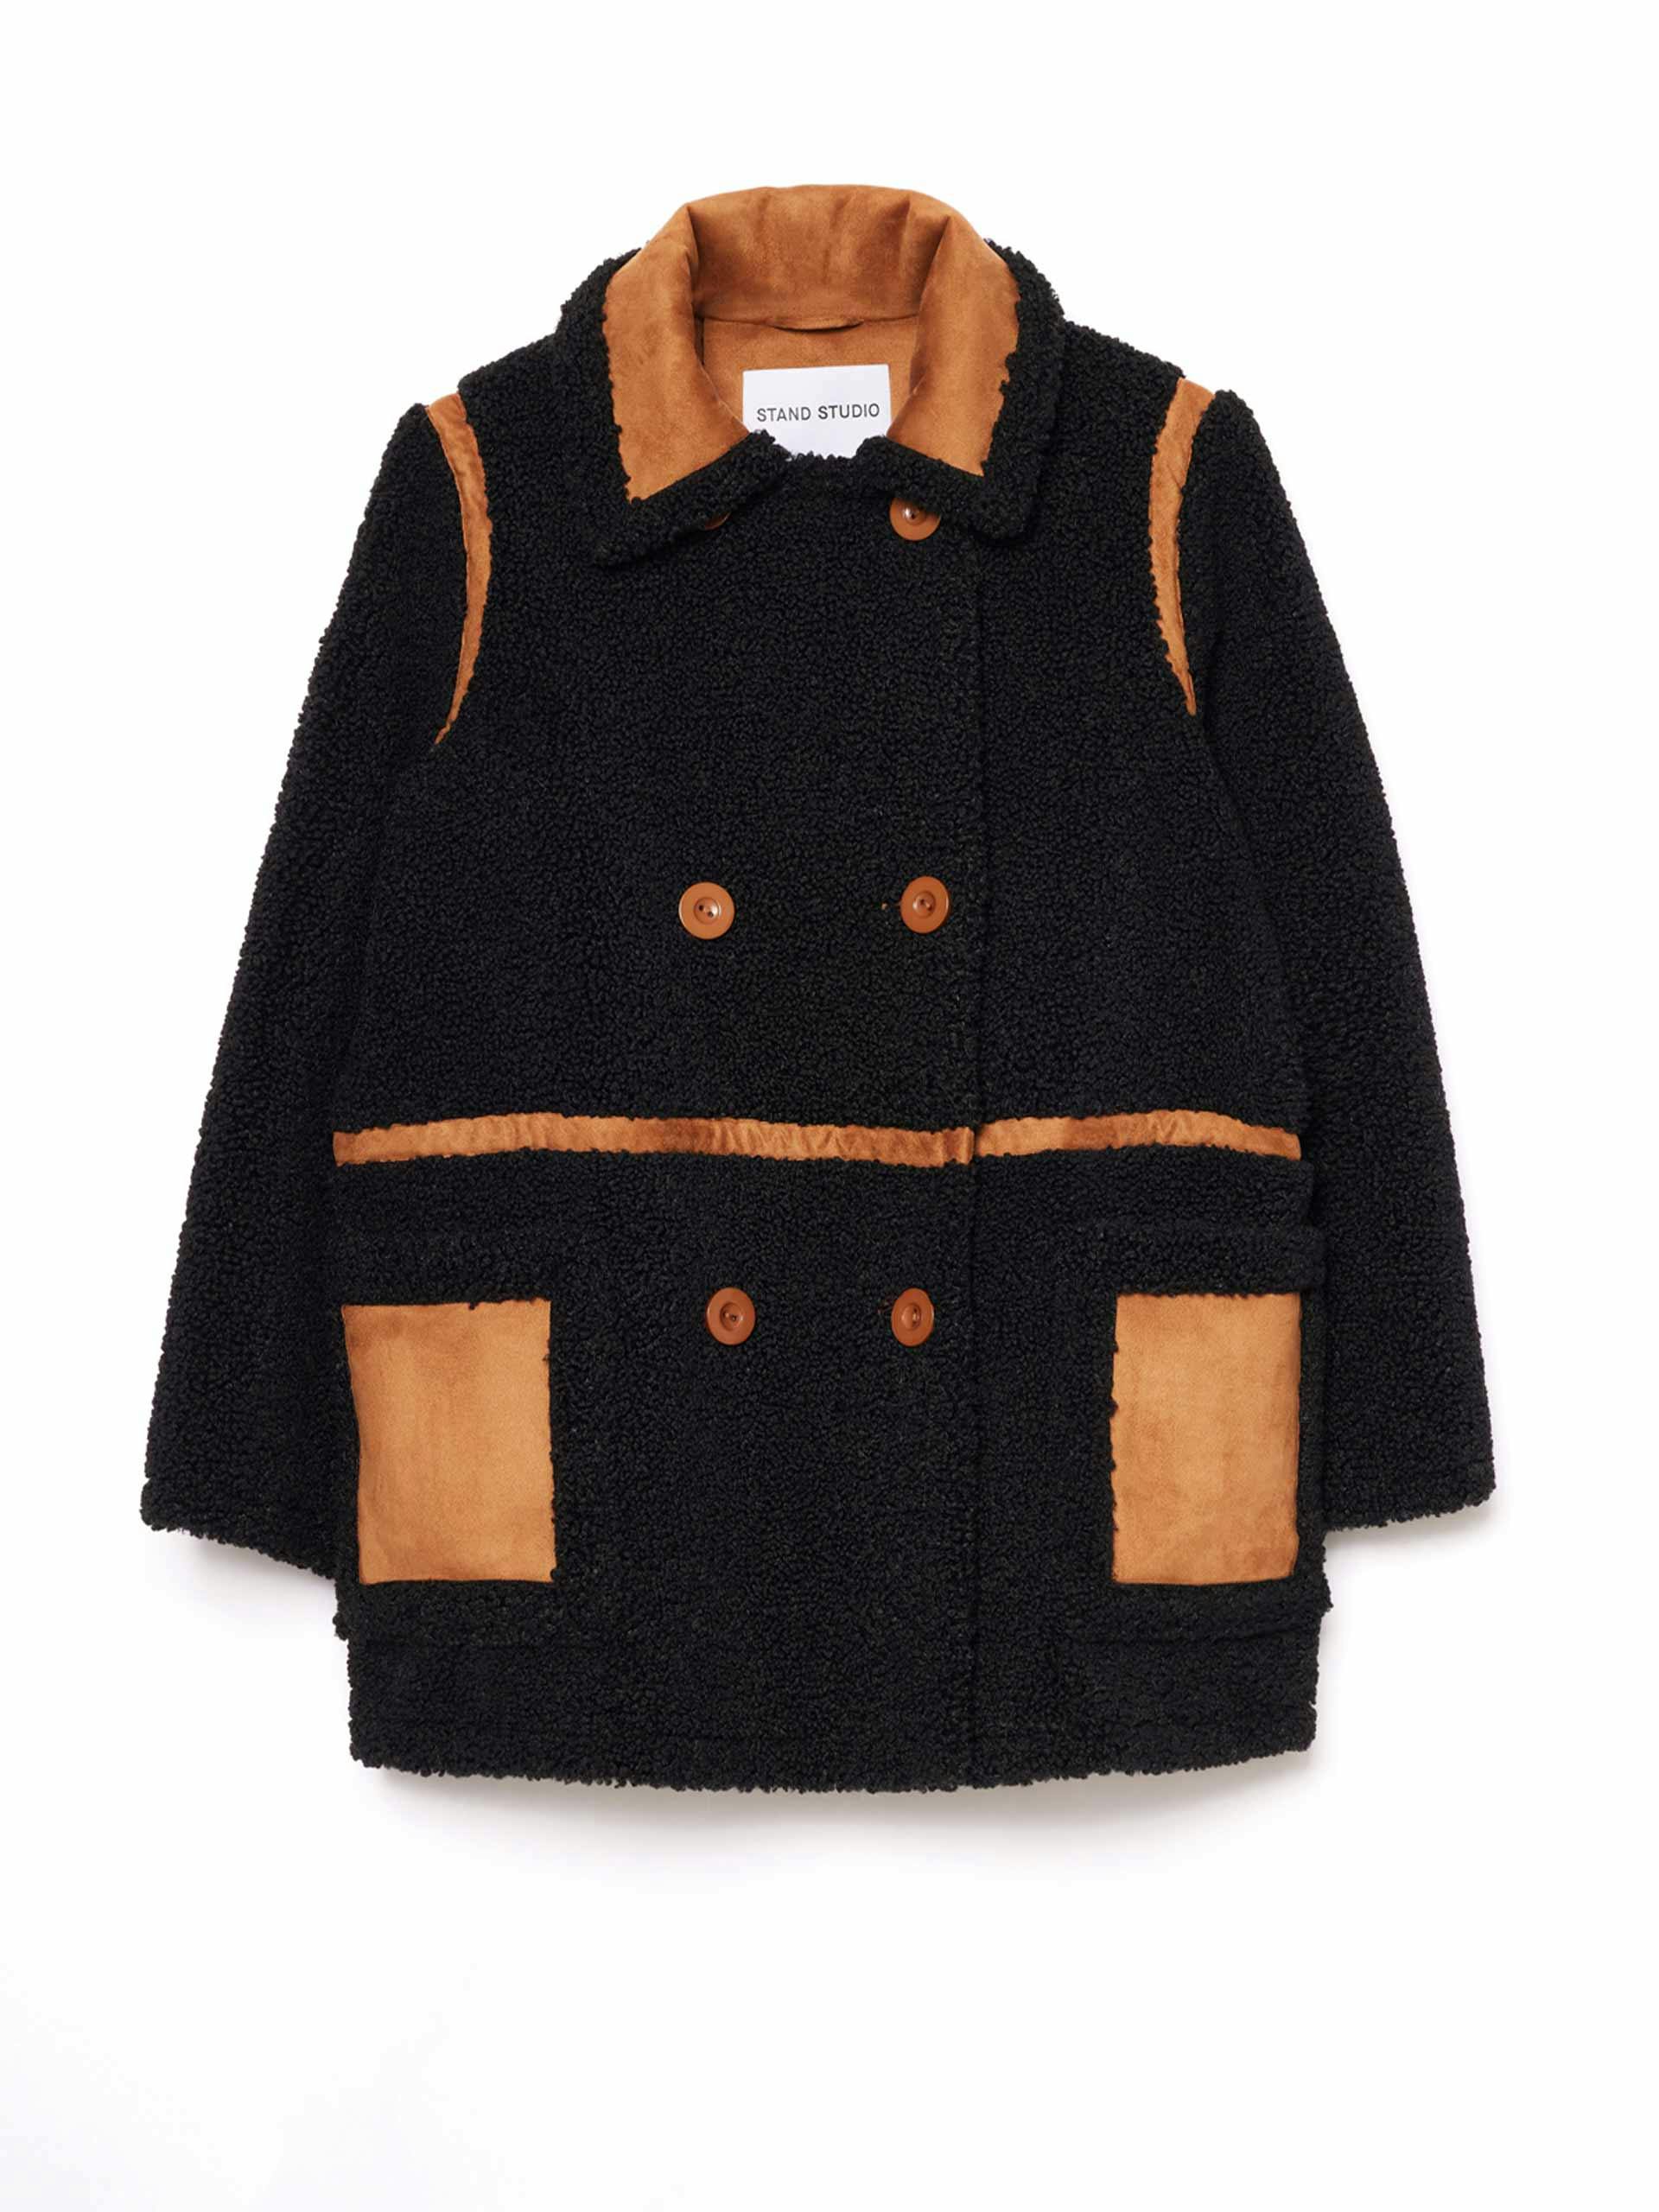 Chloe double-breasted faux-shearling jacket